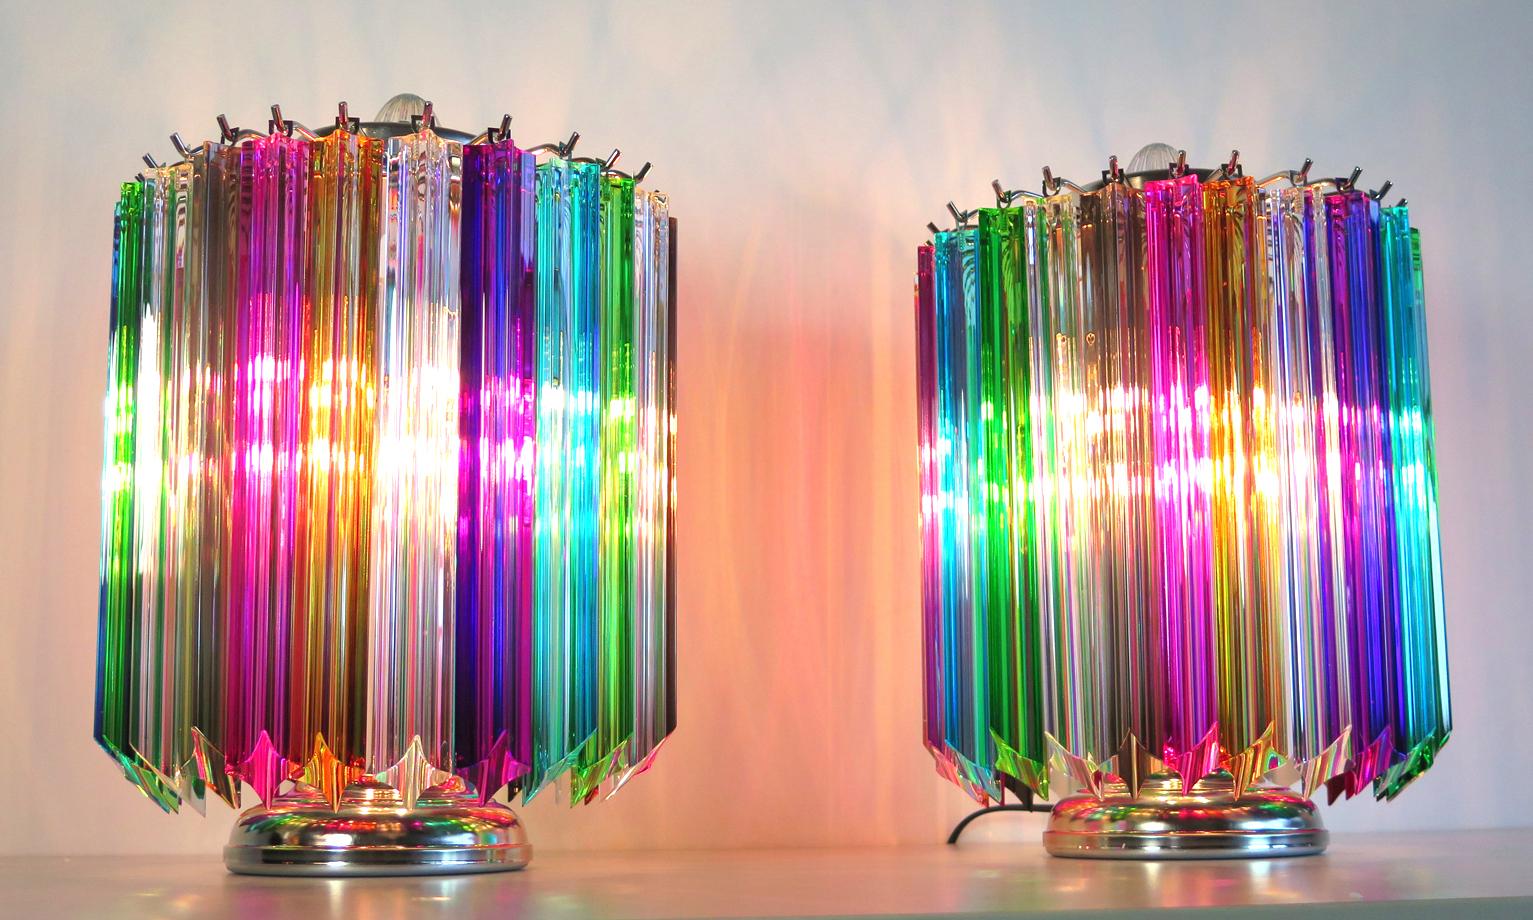 Multicolor Quadriedri table lamp - Mariangela model
Magnificent pair of table lamps, 24 quadriedri Murano crystal multicolored prism for each lamp. Nickel metal frame. Elegant object of furniture.
Period: late 20th century
Dimensions: 15 inches